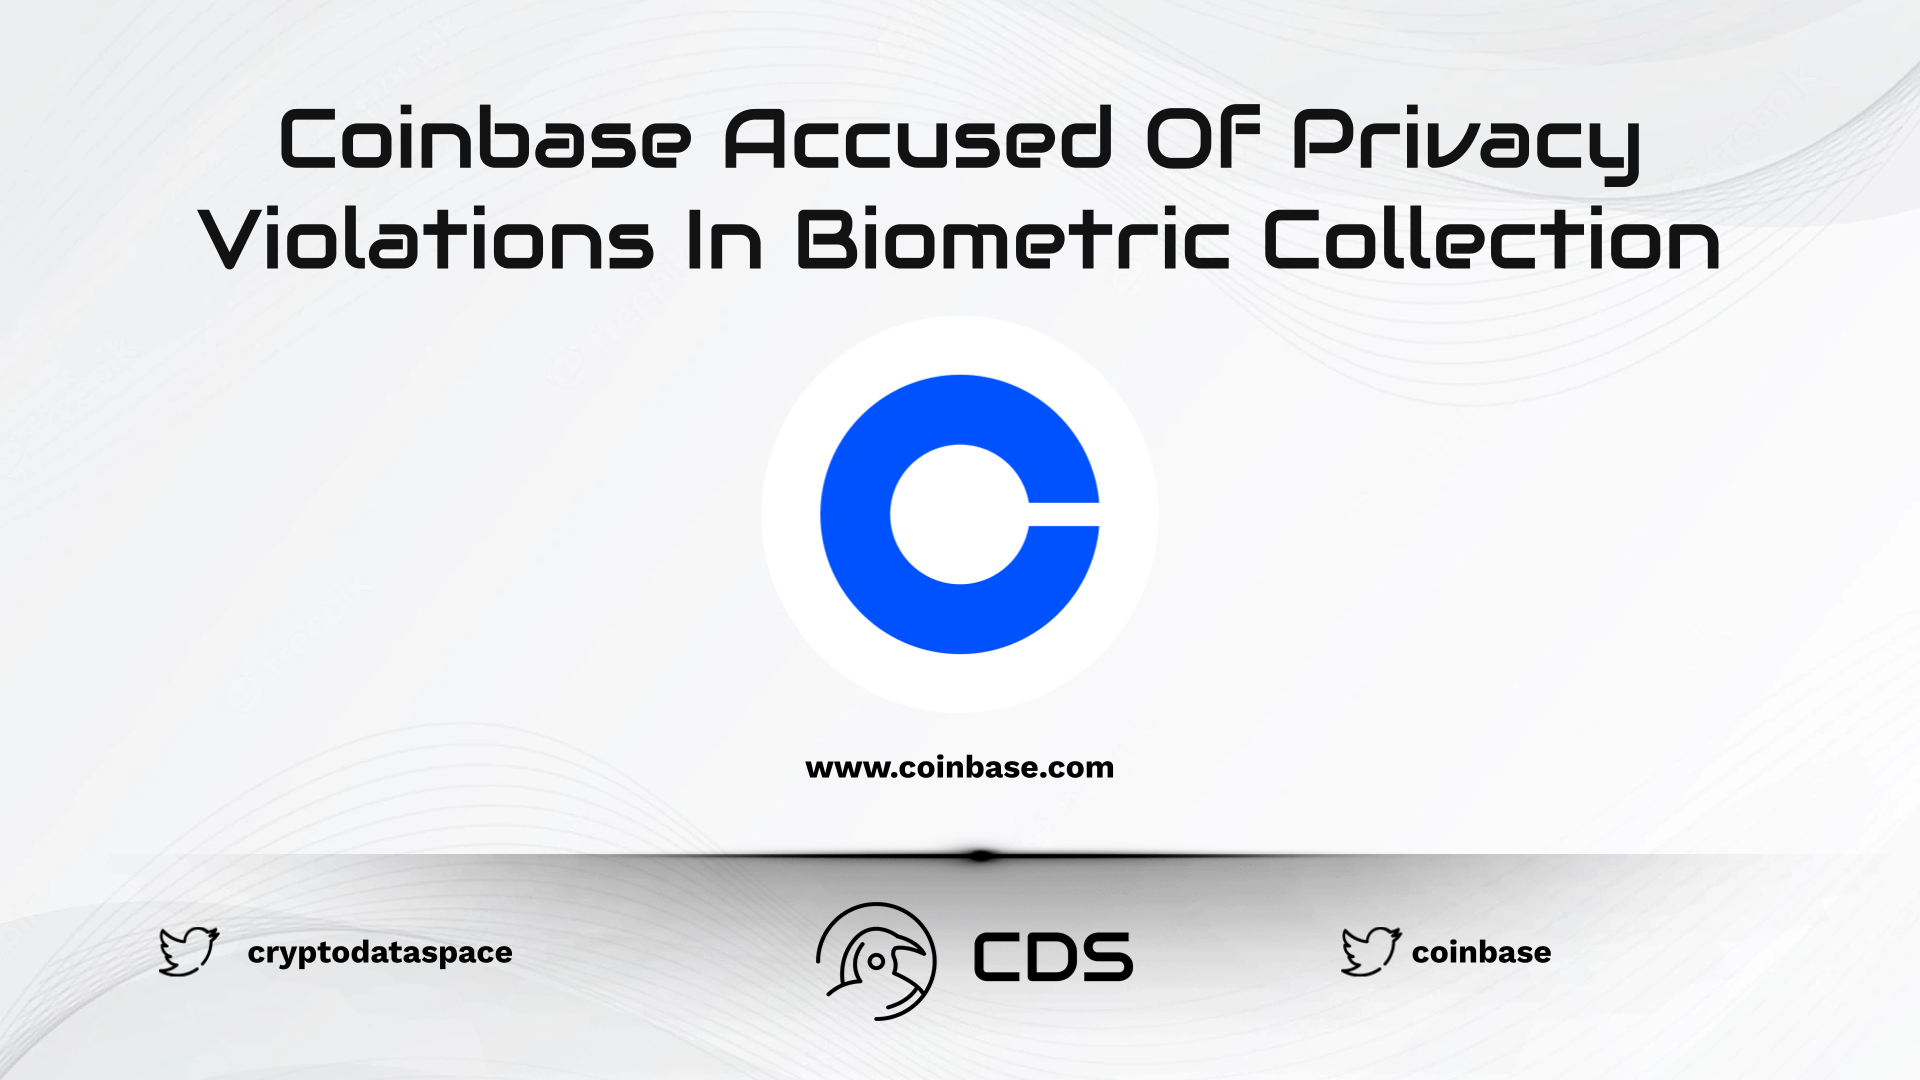 Coinbase Accused Of Privacy Violations In Biometric Collection